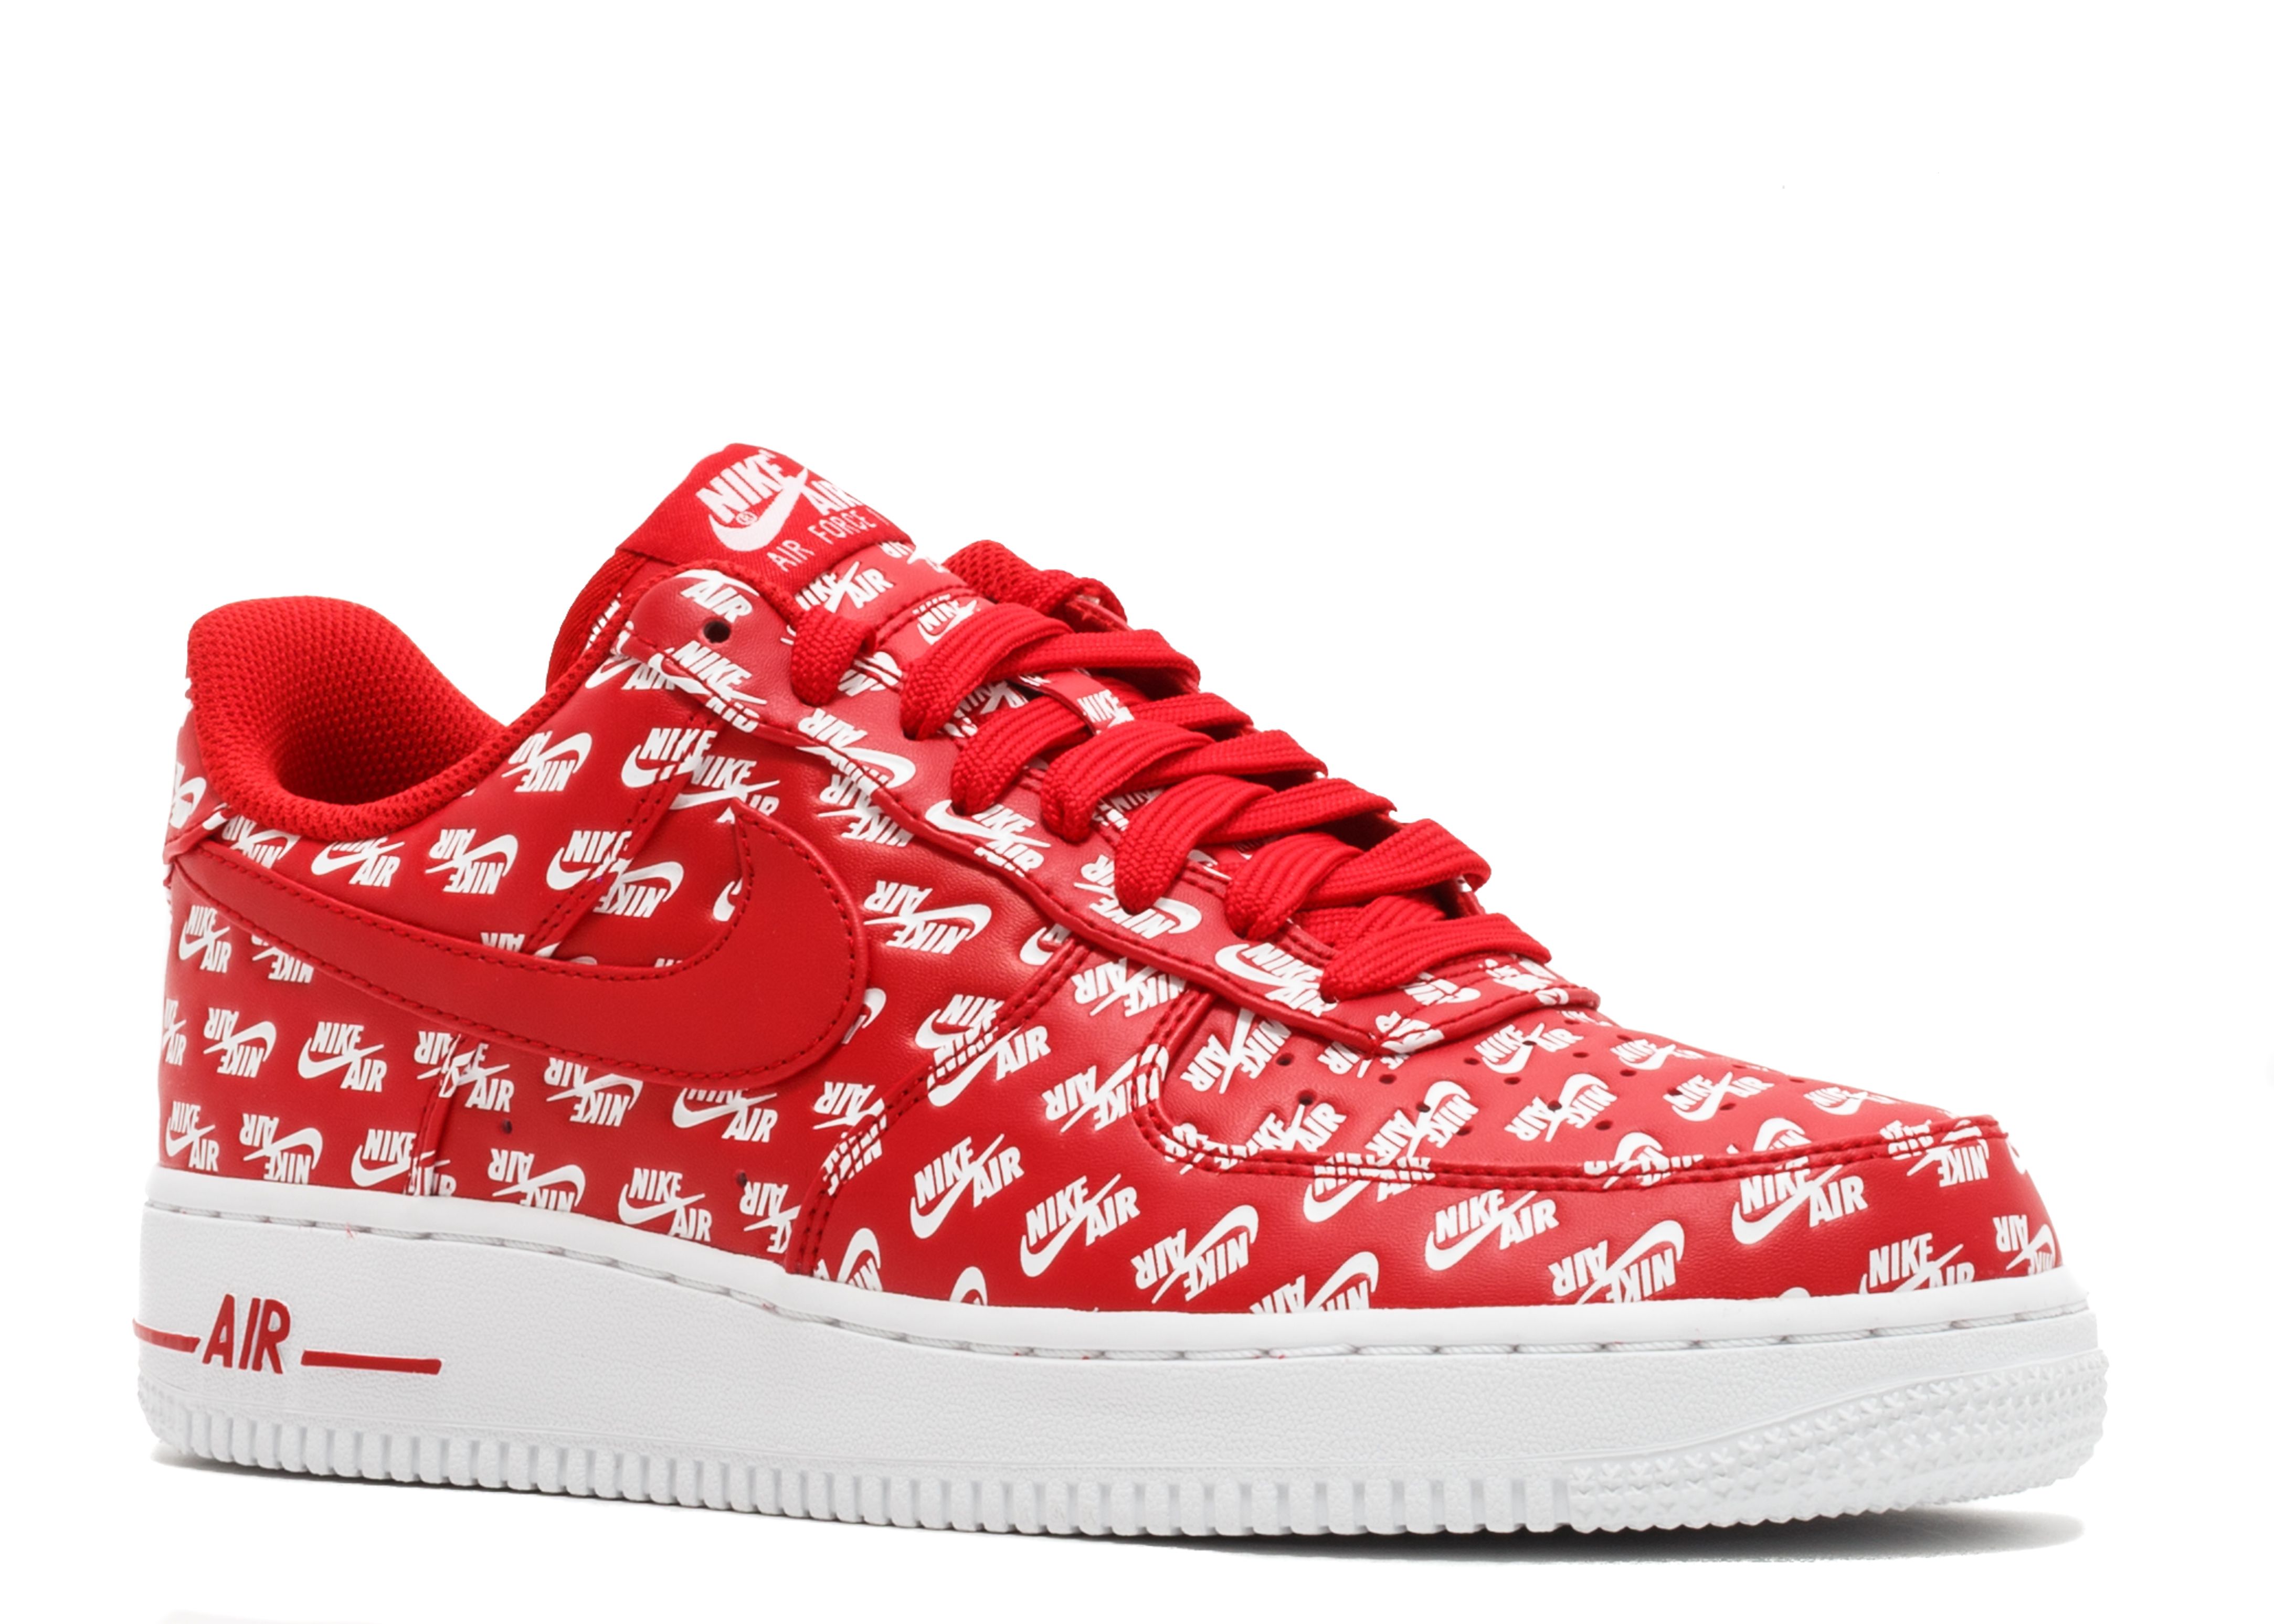 nike air force 1 07 qs red